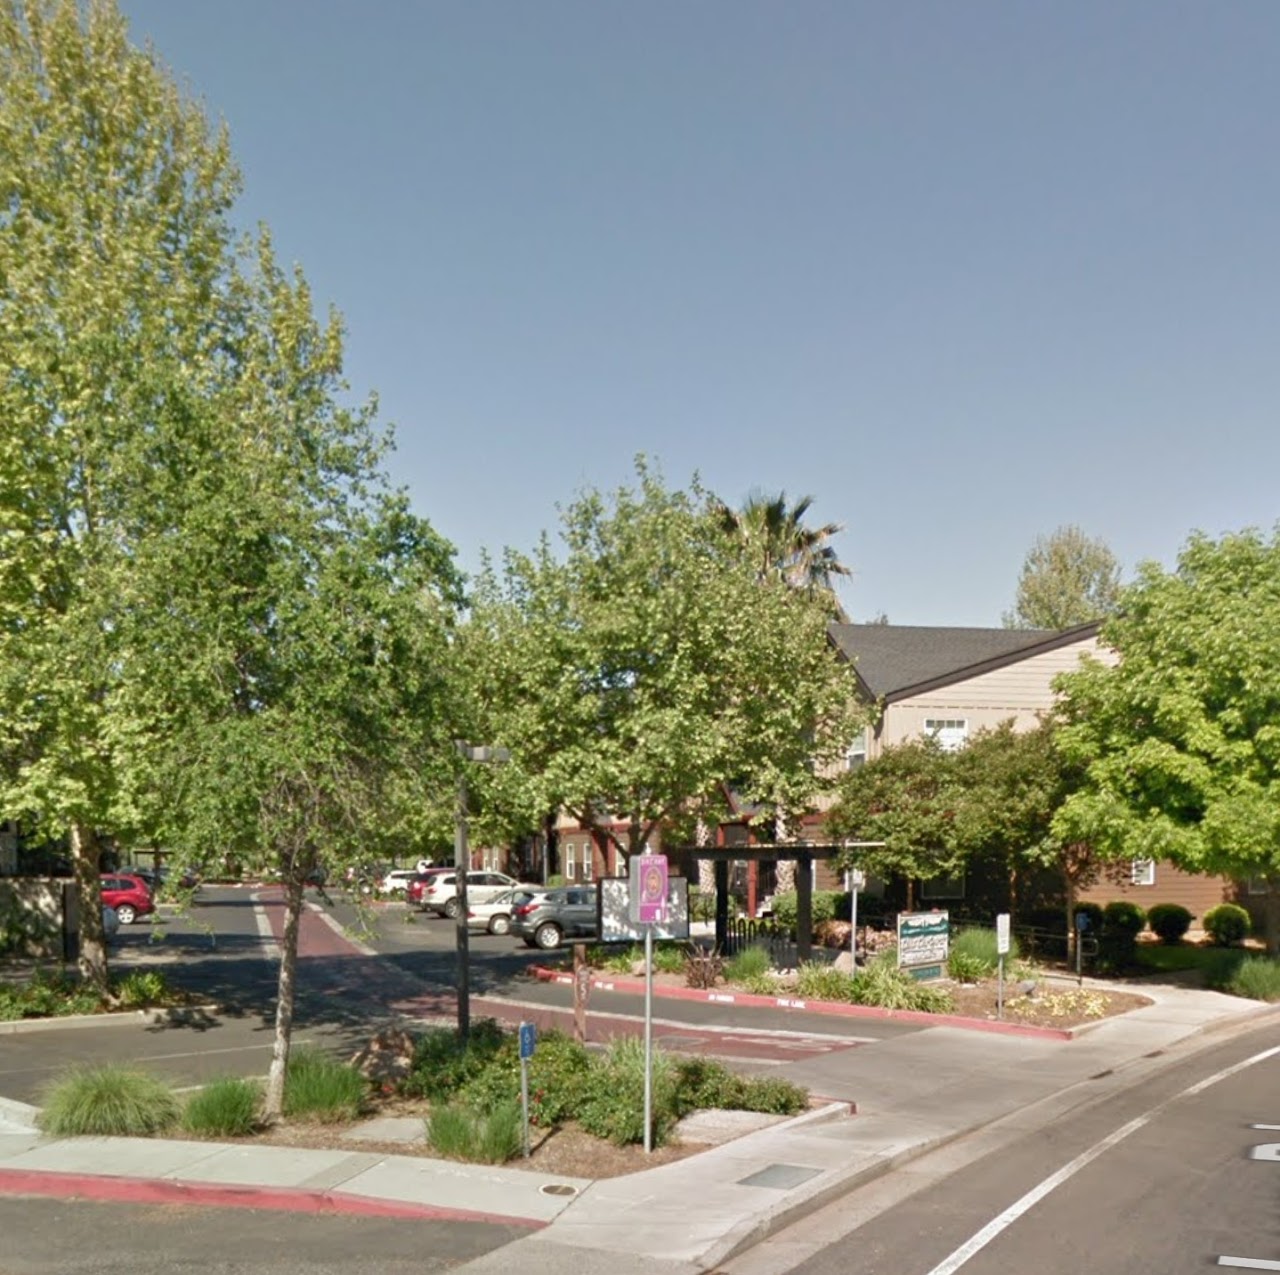 Photo of CHICO COURTYARDS. Affordable housing located at 2333 PILLSBURY RD CHICO, CA 95926